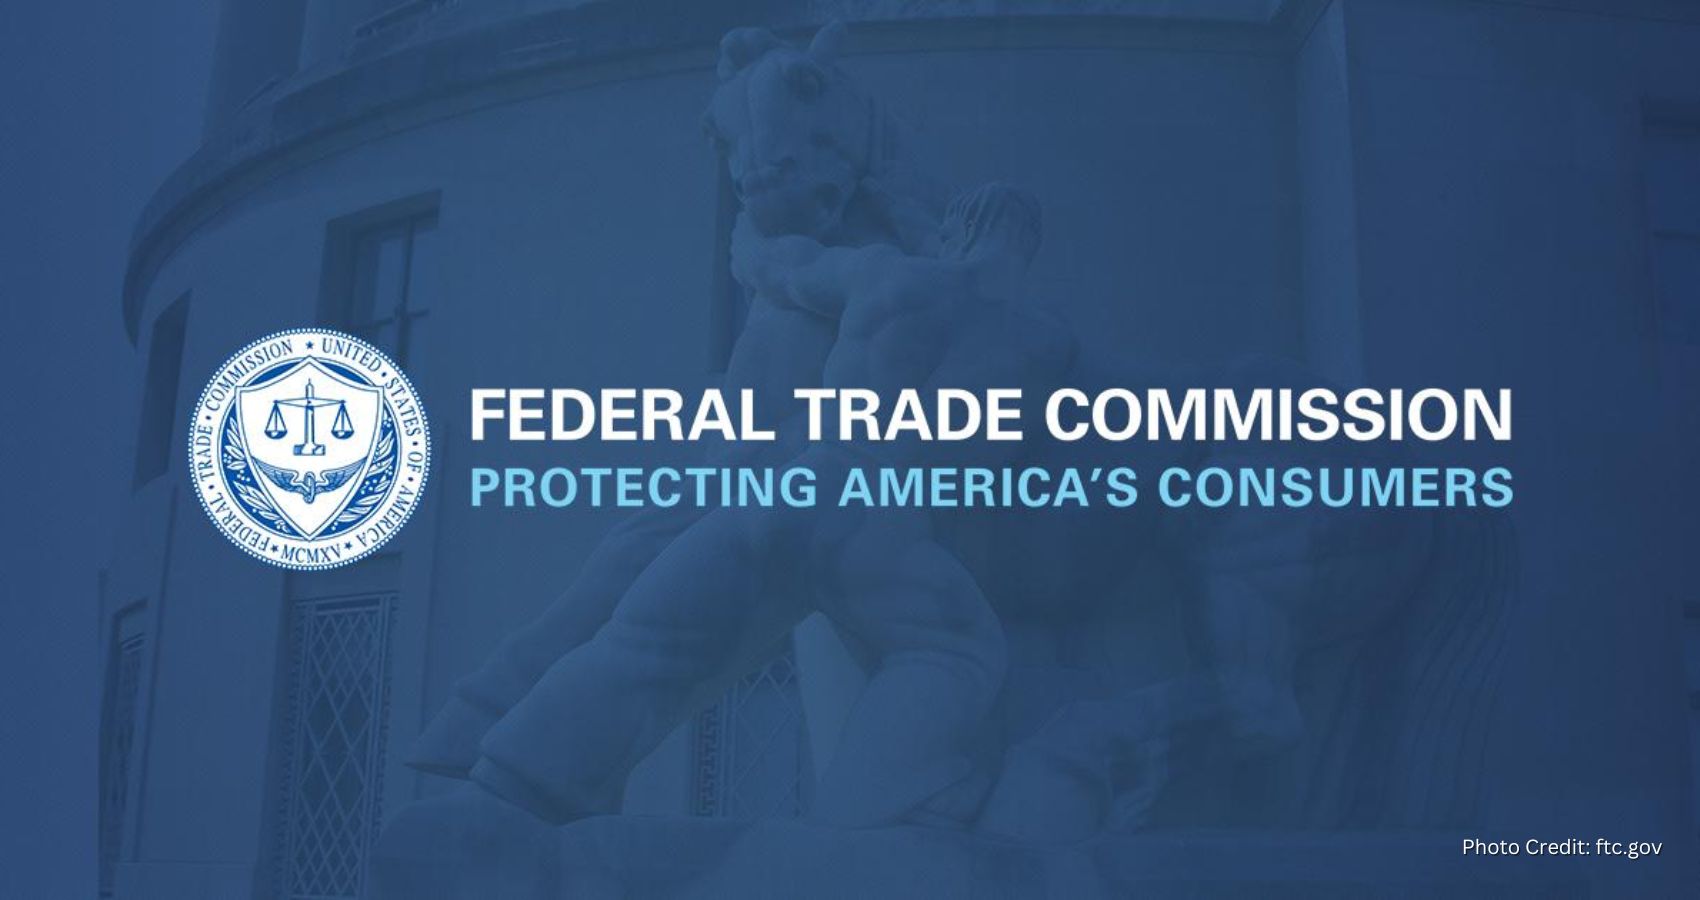 Feature and Cover FTC Narrowly Passes Ban on Noncompetes Sparking Controversy and Legal Challenges